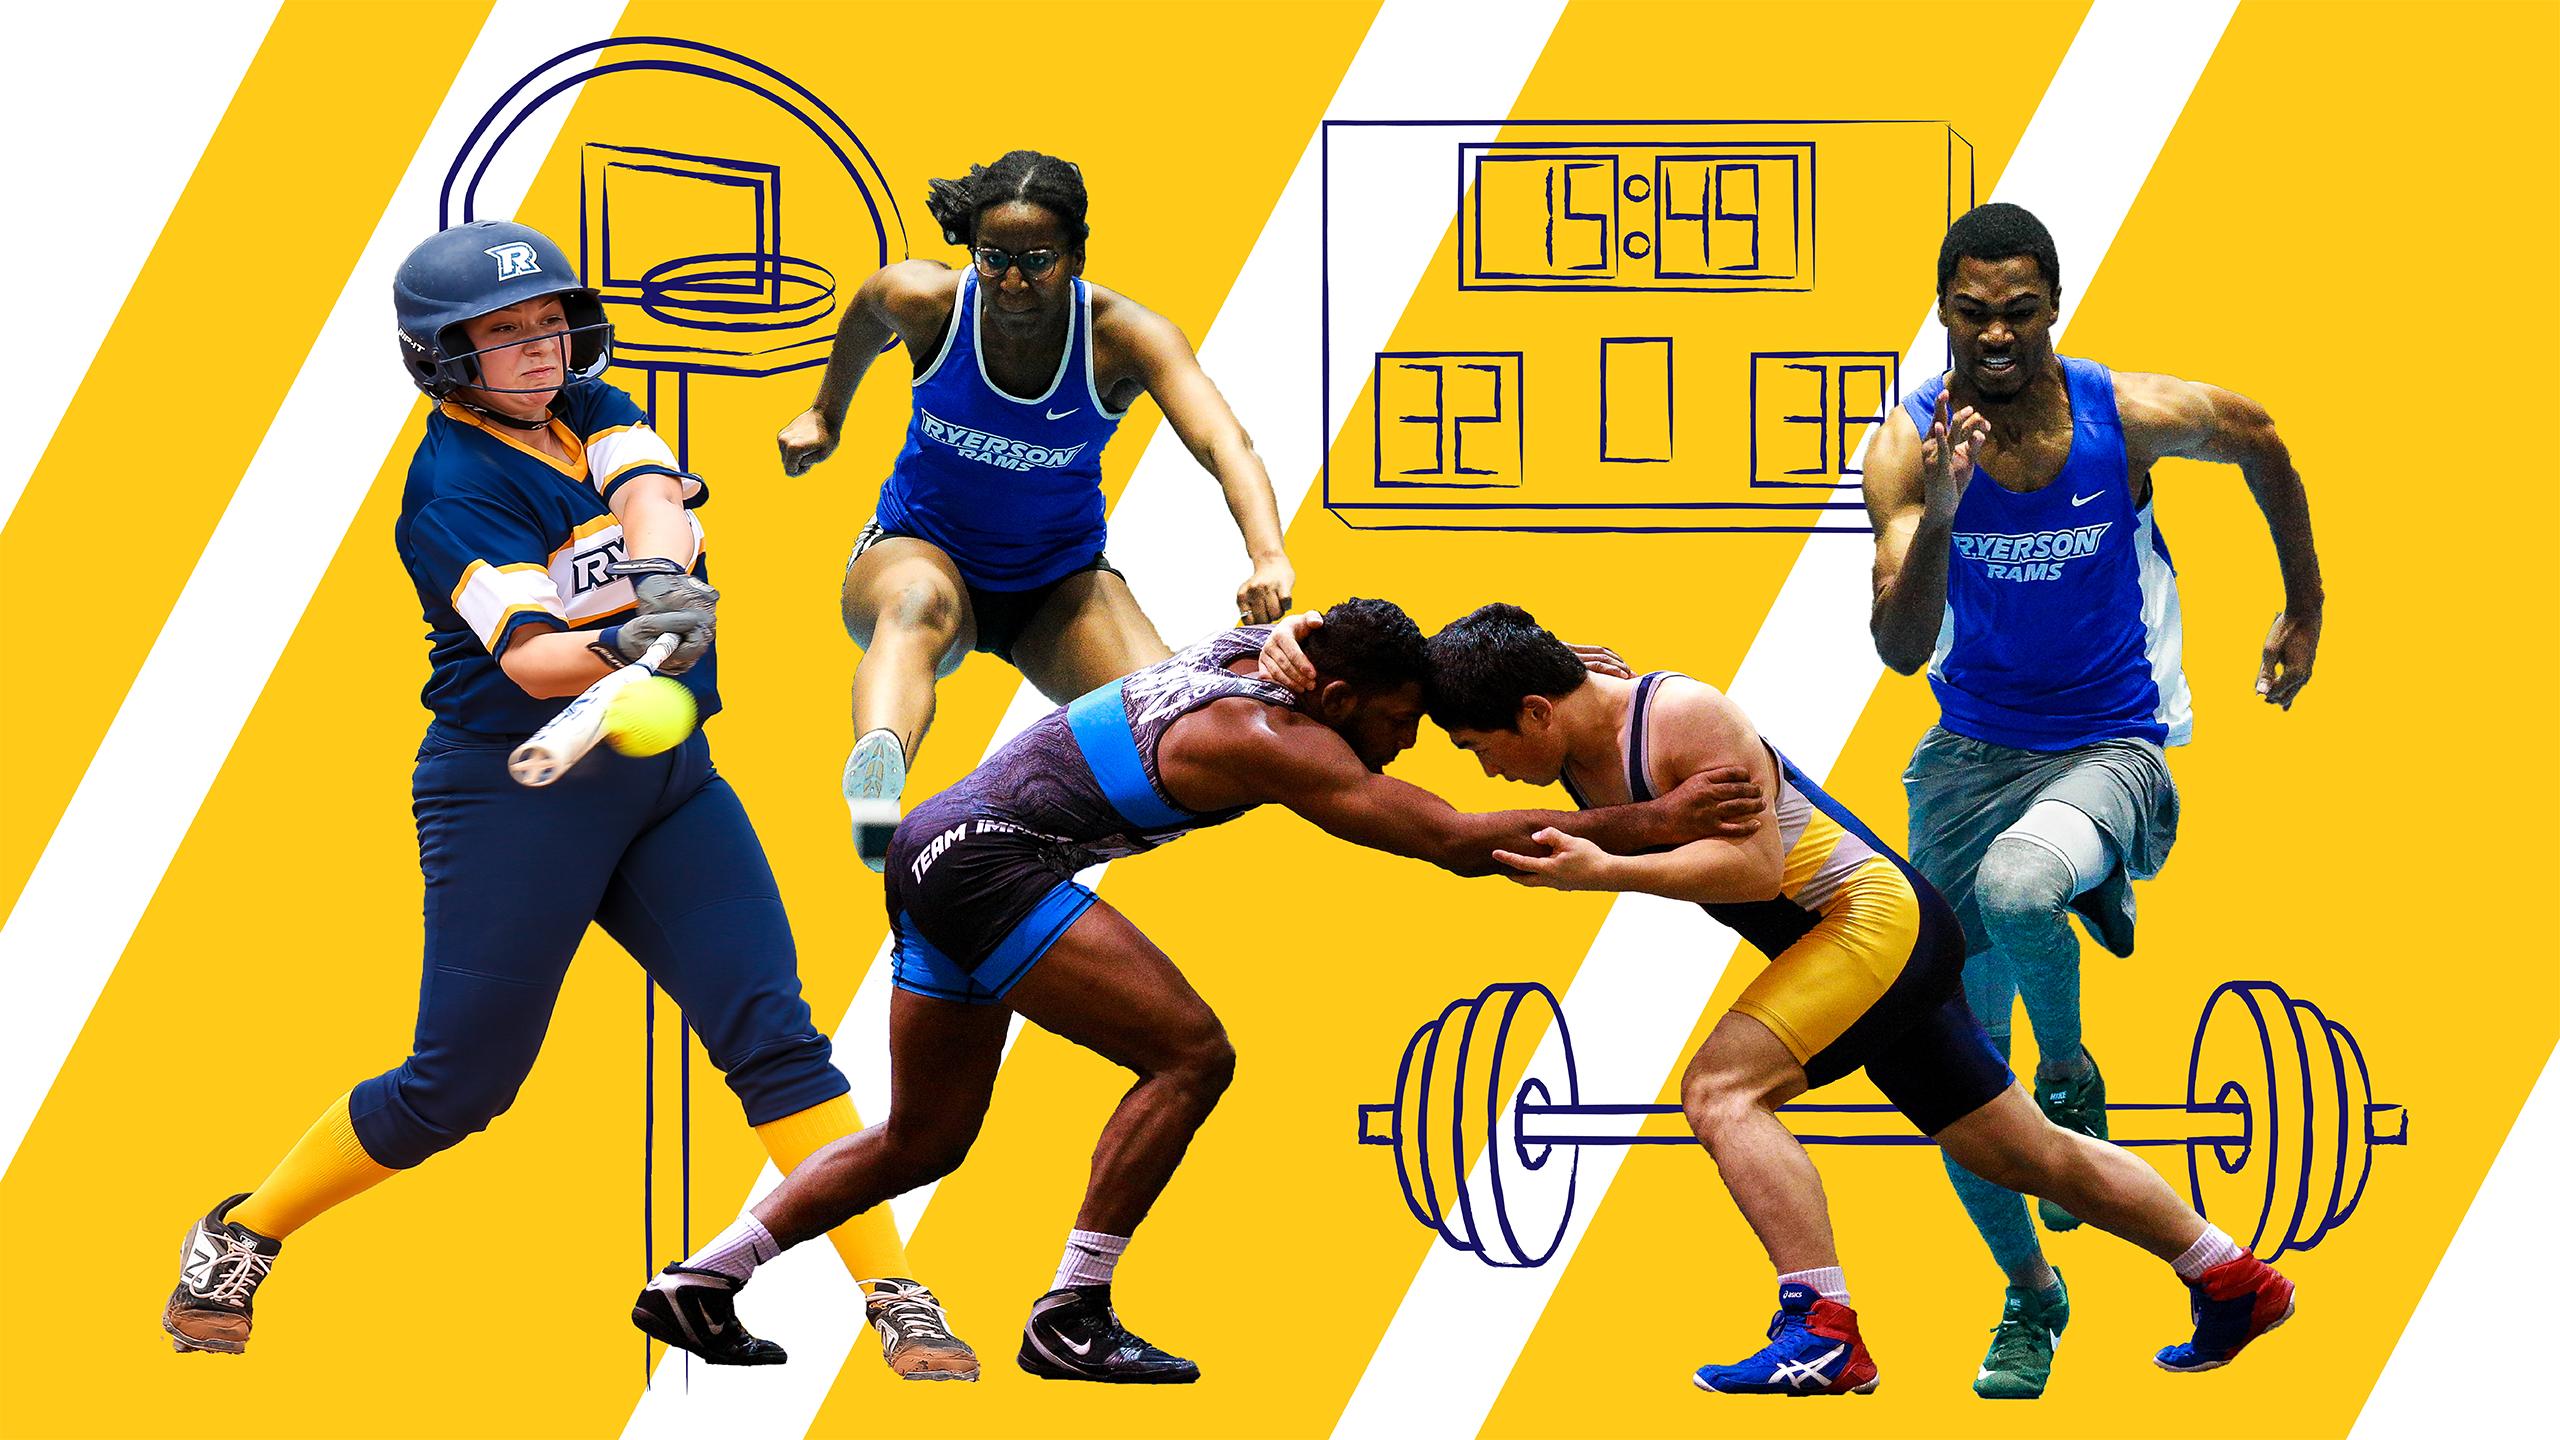 Various Ryerson athletes playing baseball, wrestling, and running track. In the background is a basketball hoop, a scoreboard, and a barbell.